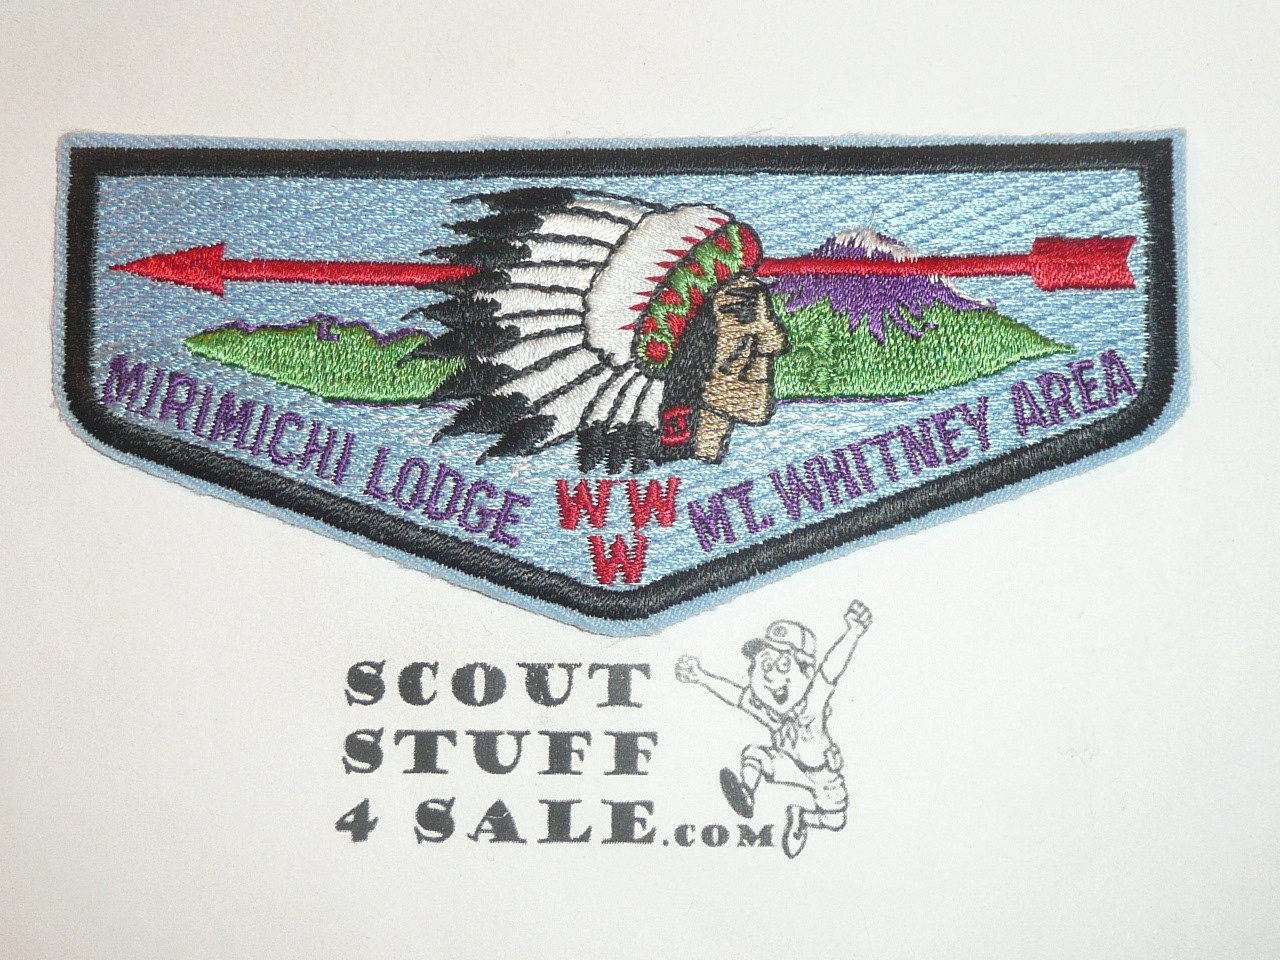 Order of the Arrow Lodge #102 Mirimichi s16 Flap Patch